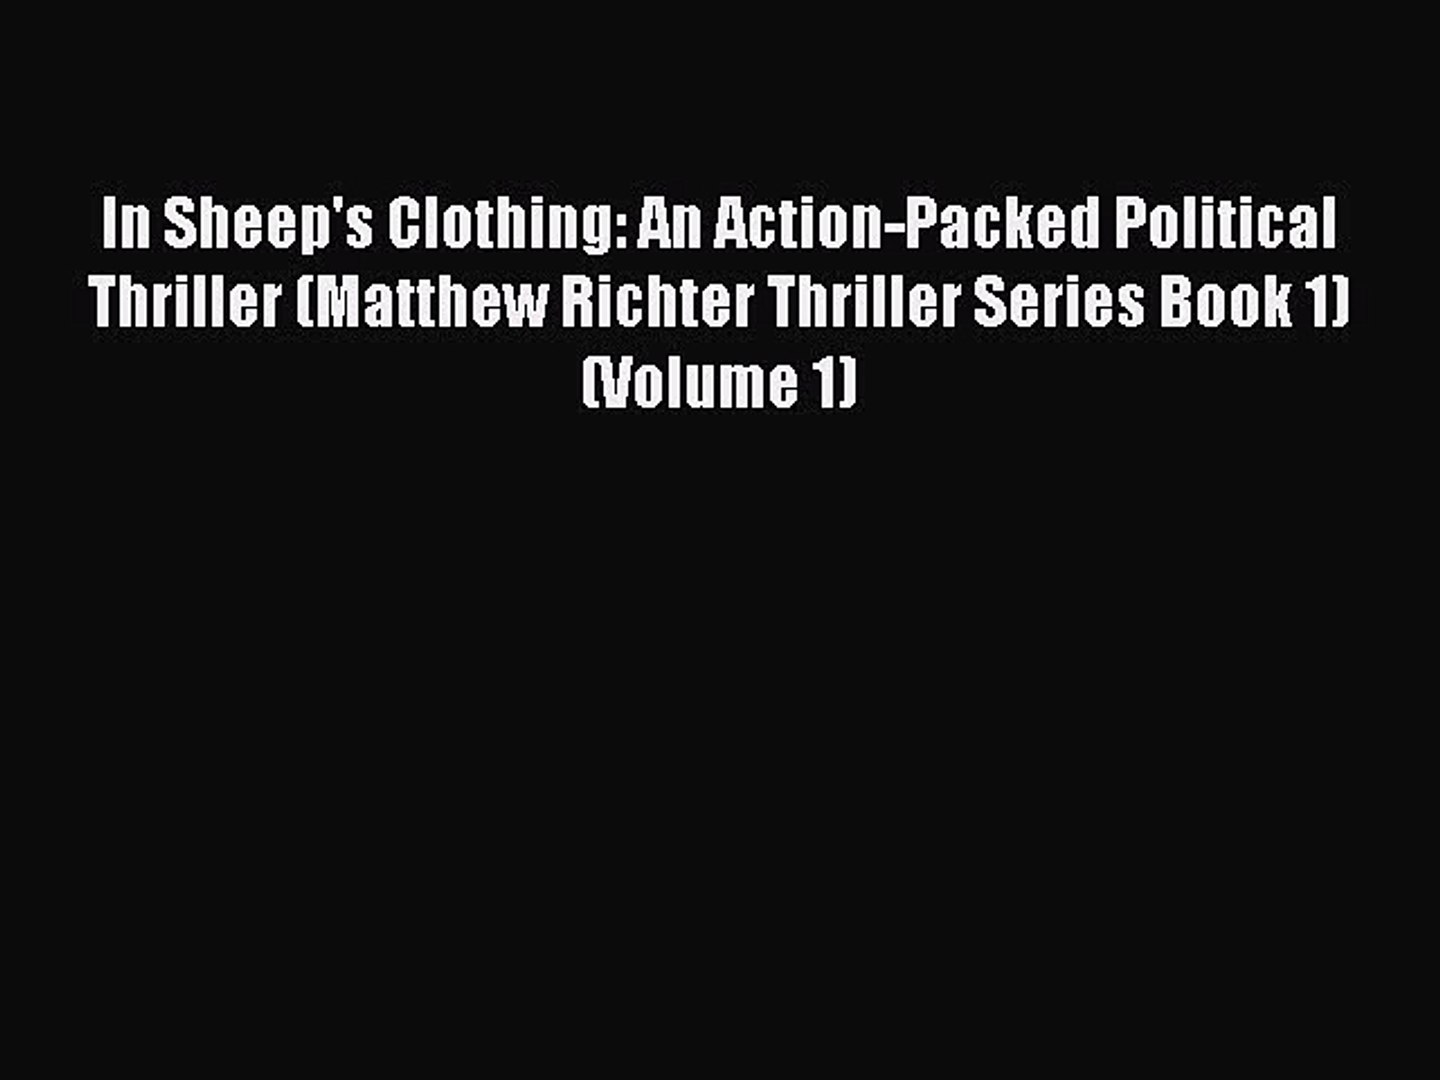 Read Book In Sheep's Clothing: An Action-Packed Political Thriller (Matthew Richter Thriller